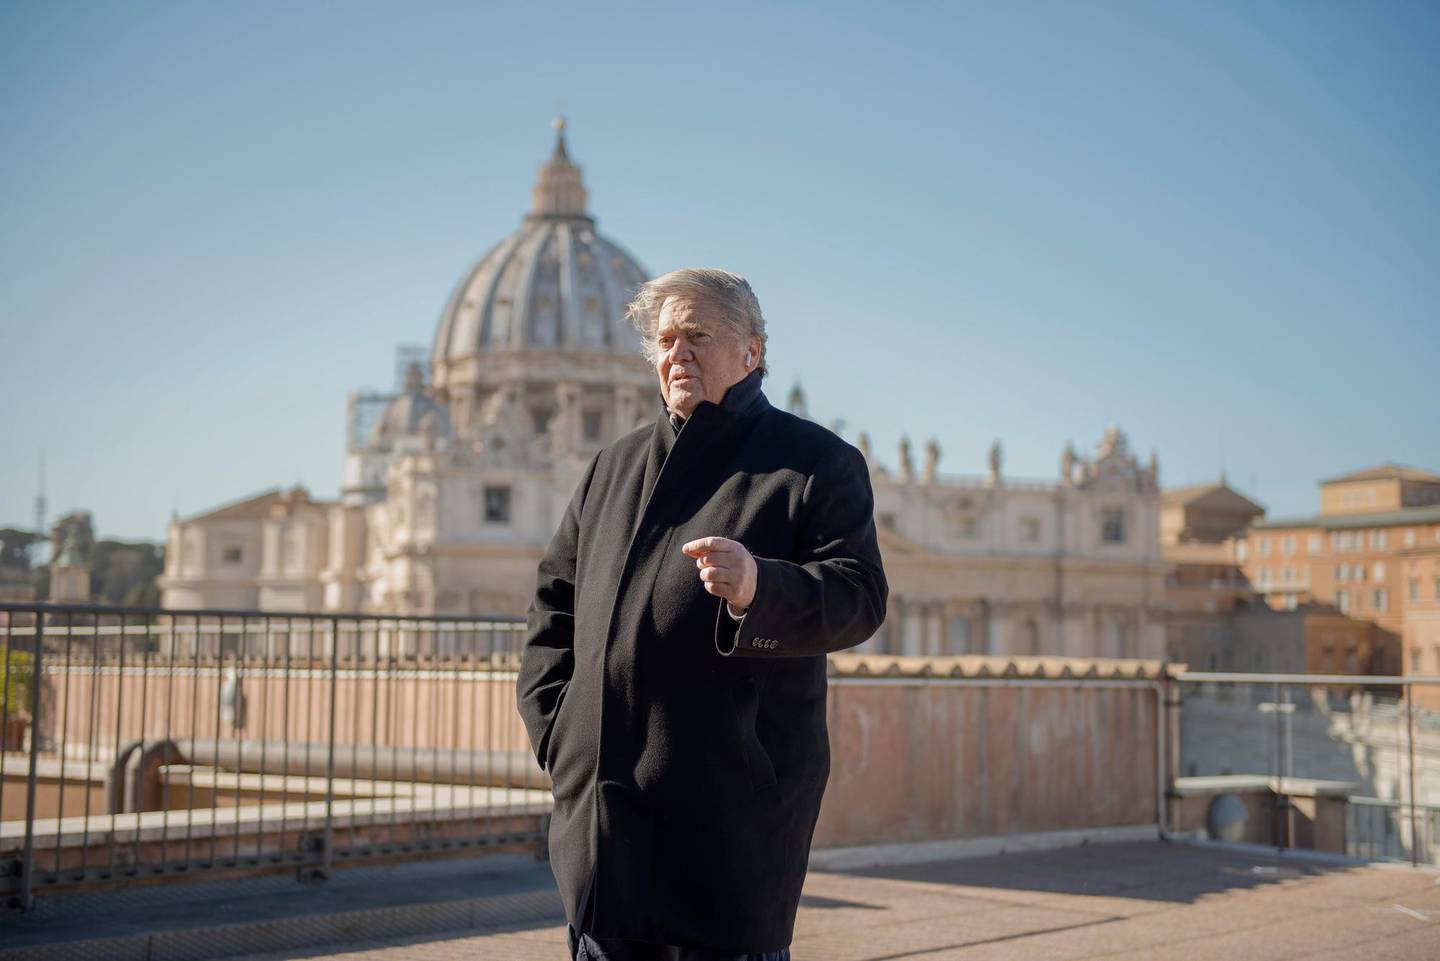 In this picture taken Saturday, Feb. 23, 2019, former White House strategist Steve Bannon poses for portraits during a break of his media activities on a terrace overlooking St. Peter's Square at the Vatican. (AP Photo/Marco Bonomo)